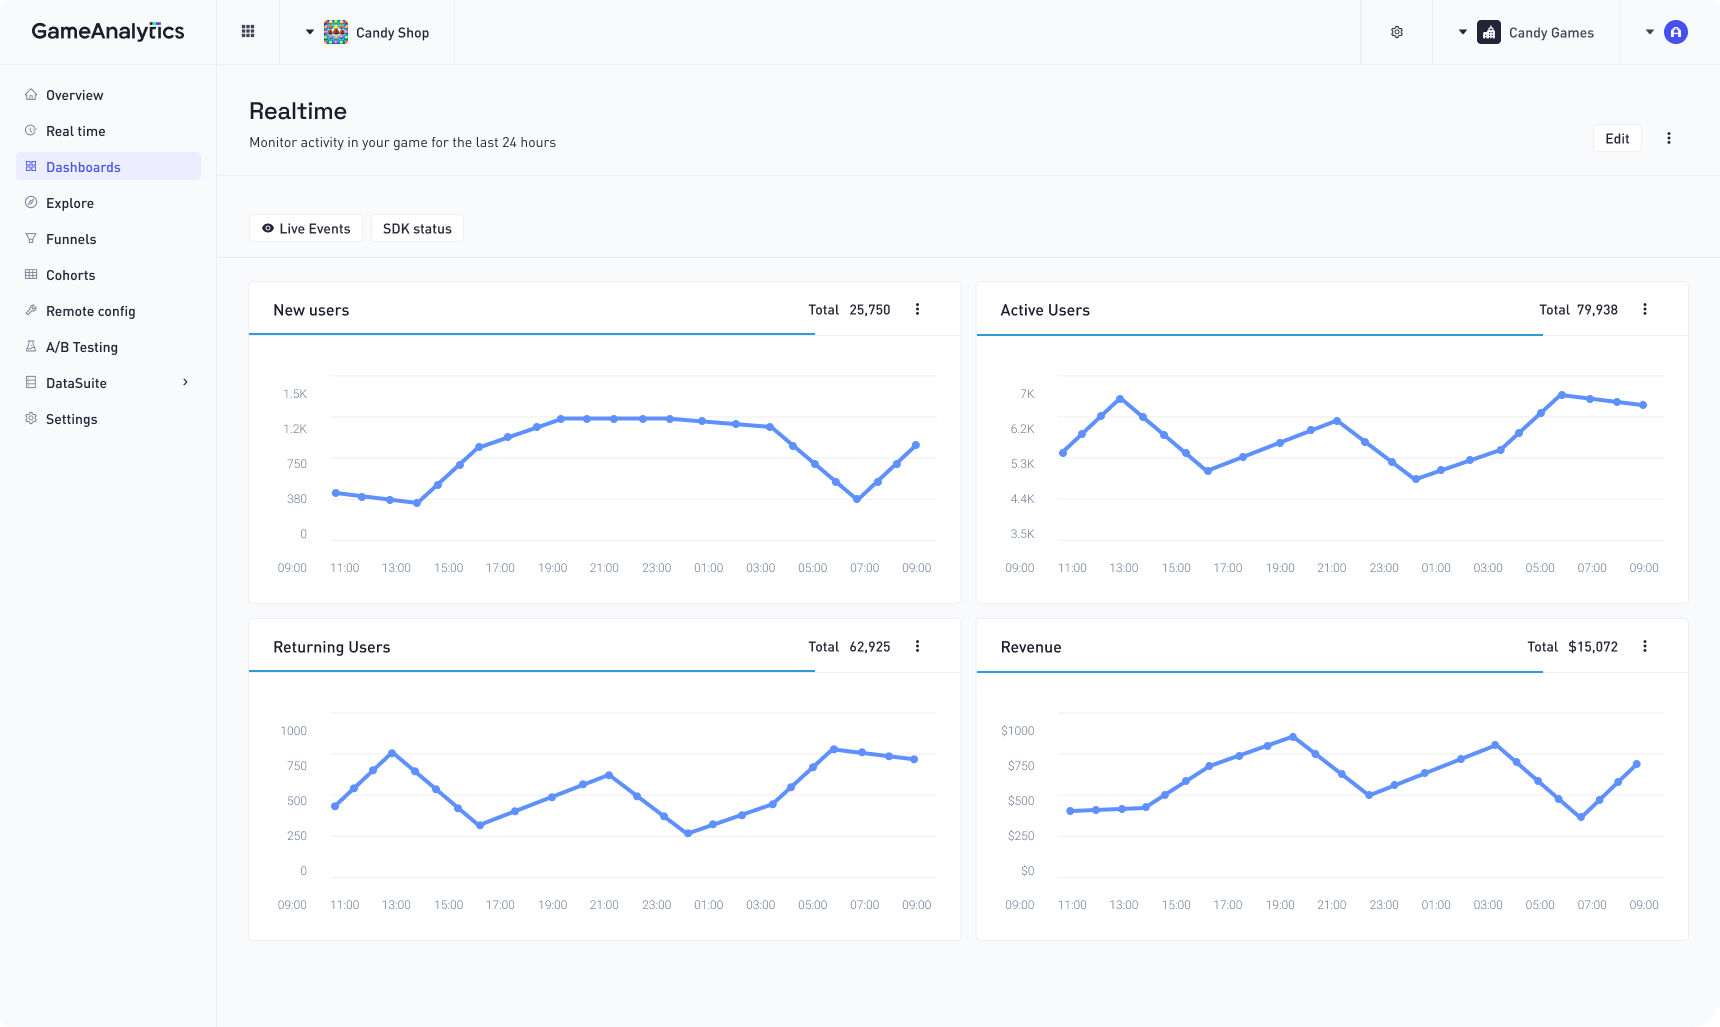 A view of the real-time data dashboard